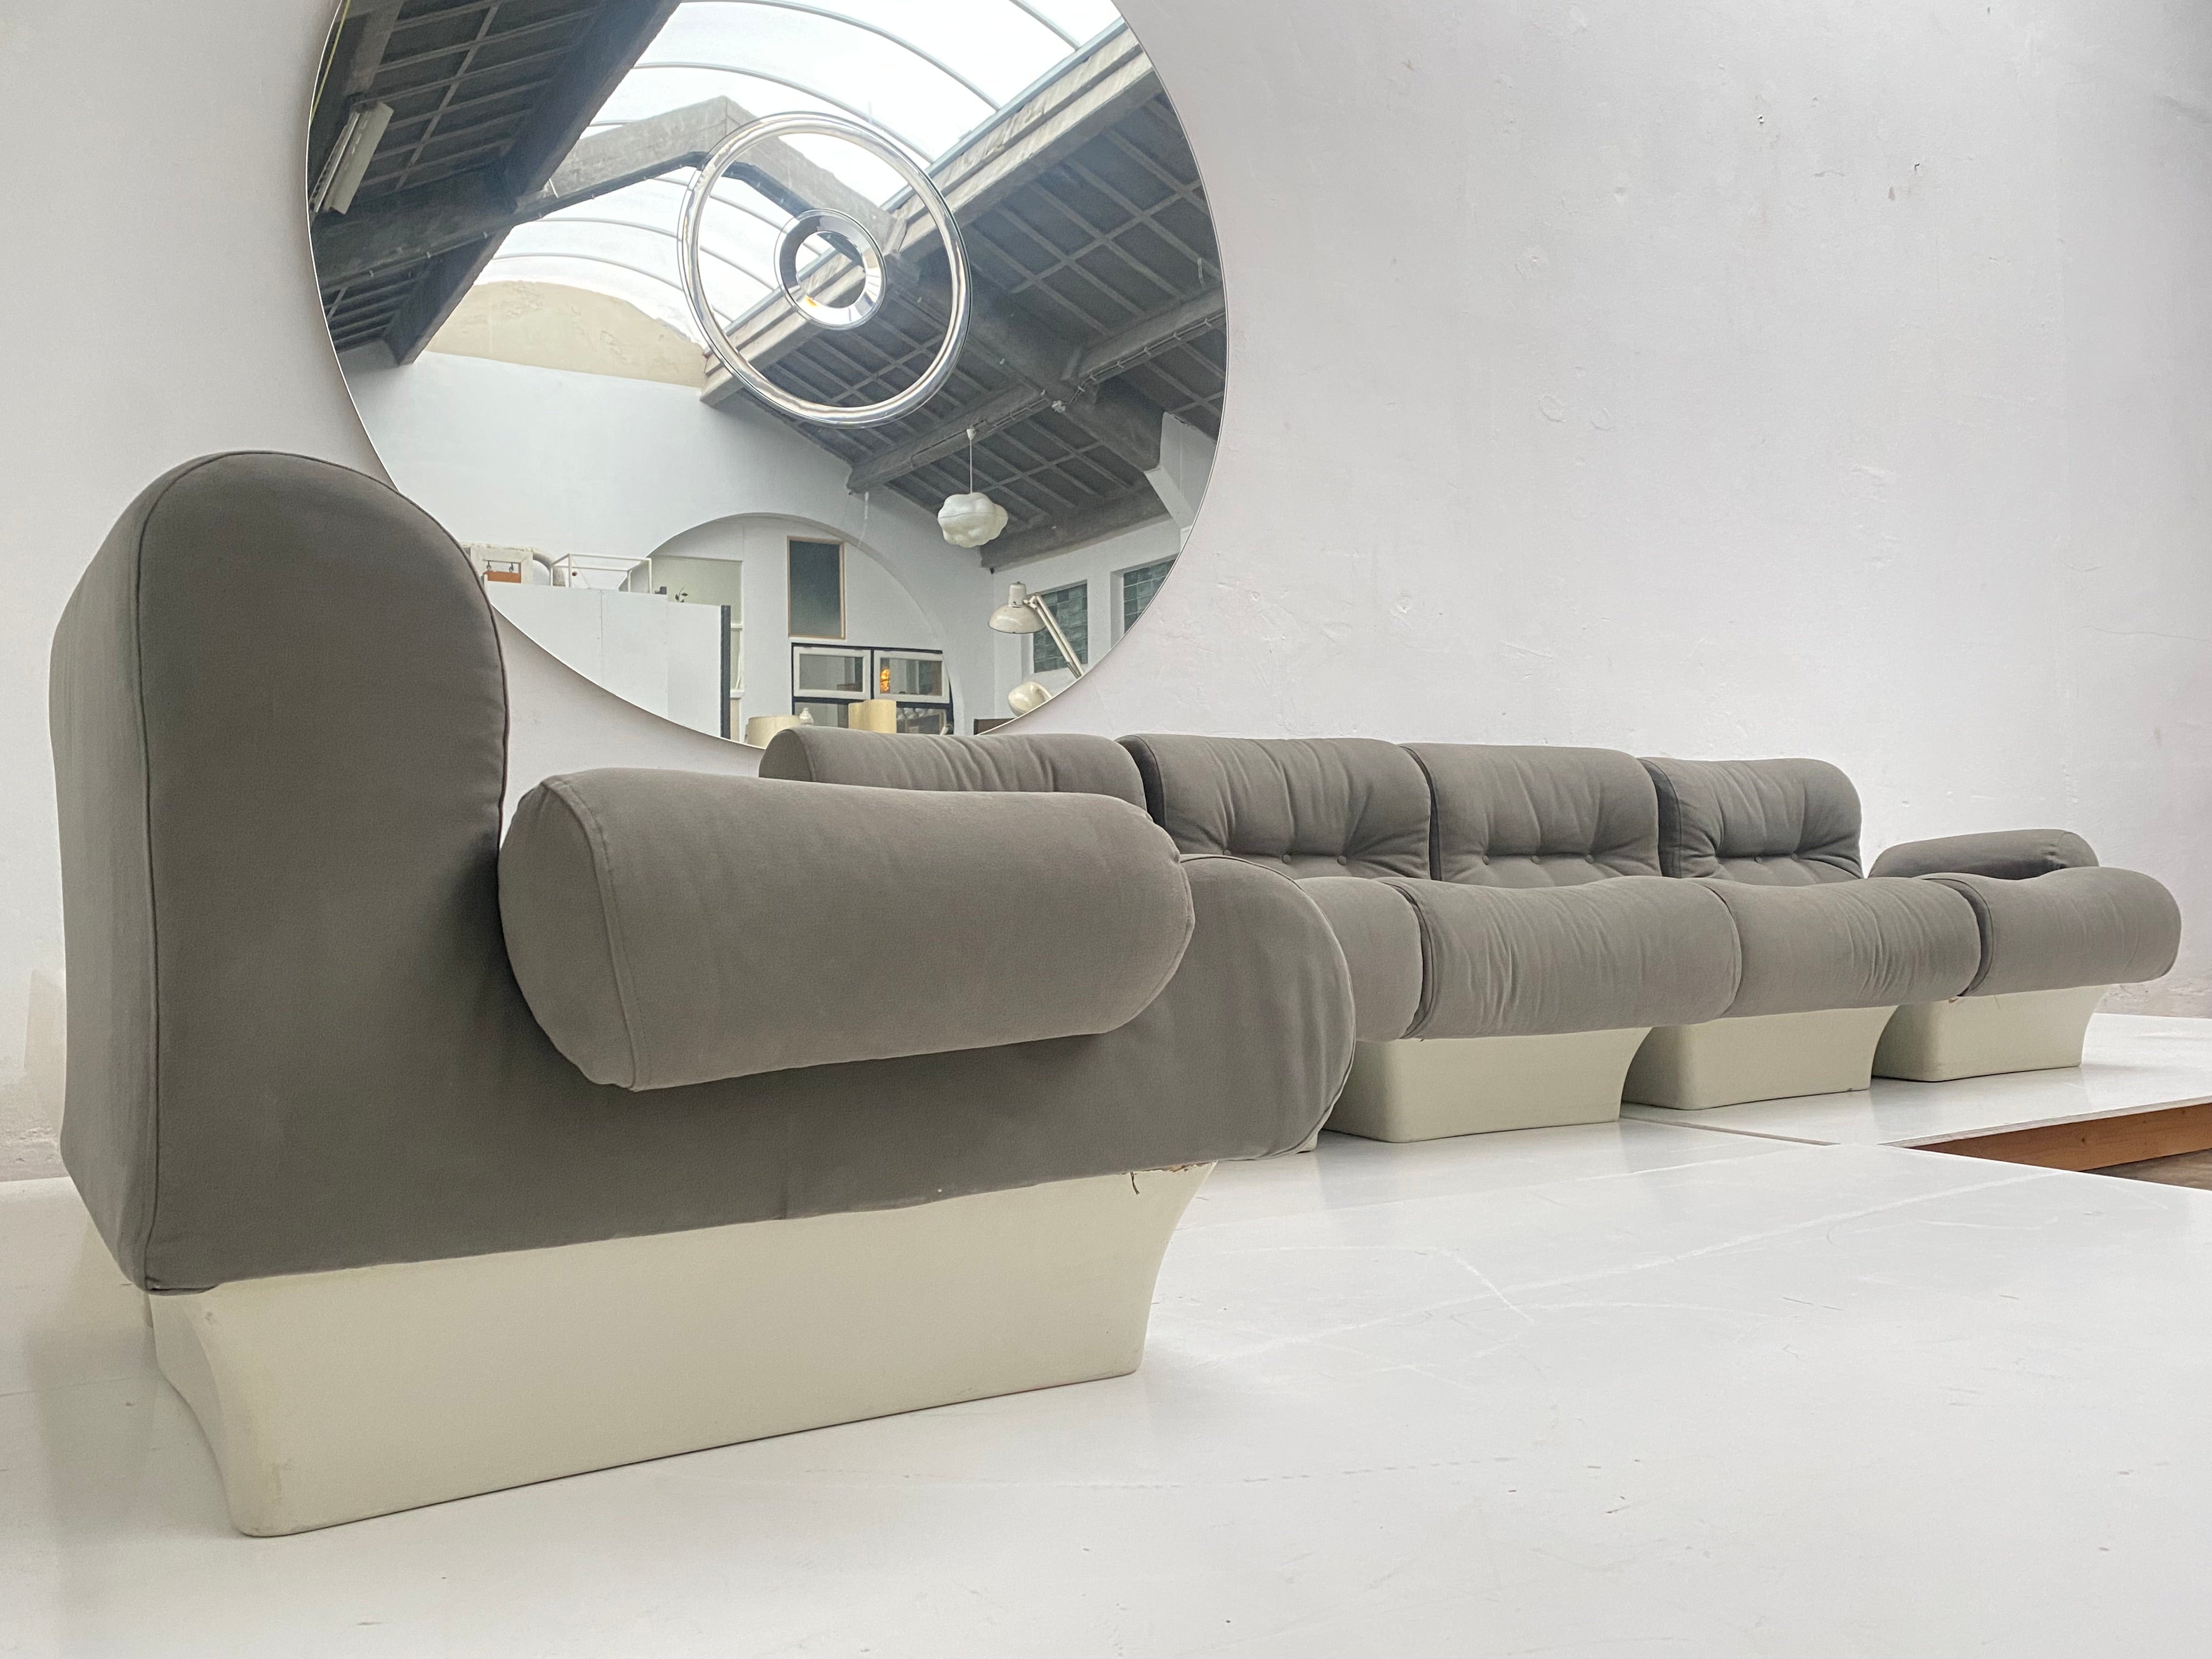 Here we have a very rare opportunity, a large set of five Otto Zapf  1967 'sofalette'  modular seating elements and a very rare 'Sofalette' corner table in fibreglass  
Newly upholstered in 100% cotton Canvas by Romo and comes complete with the